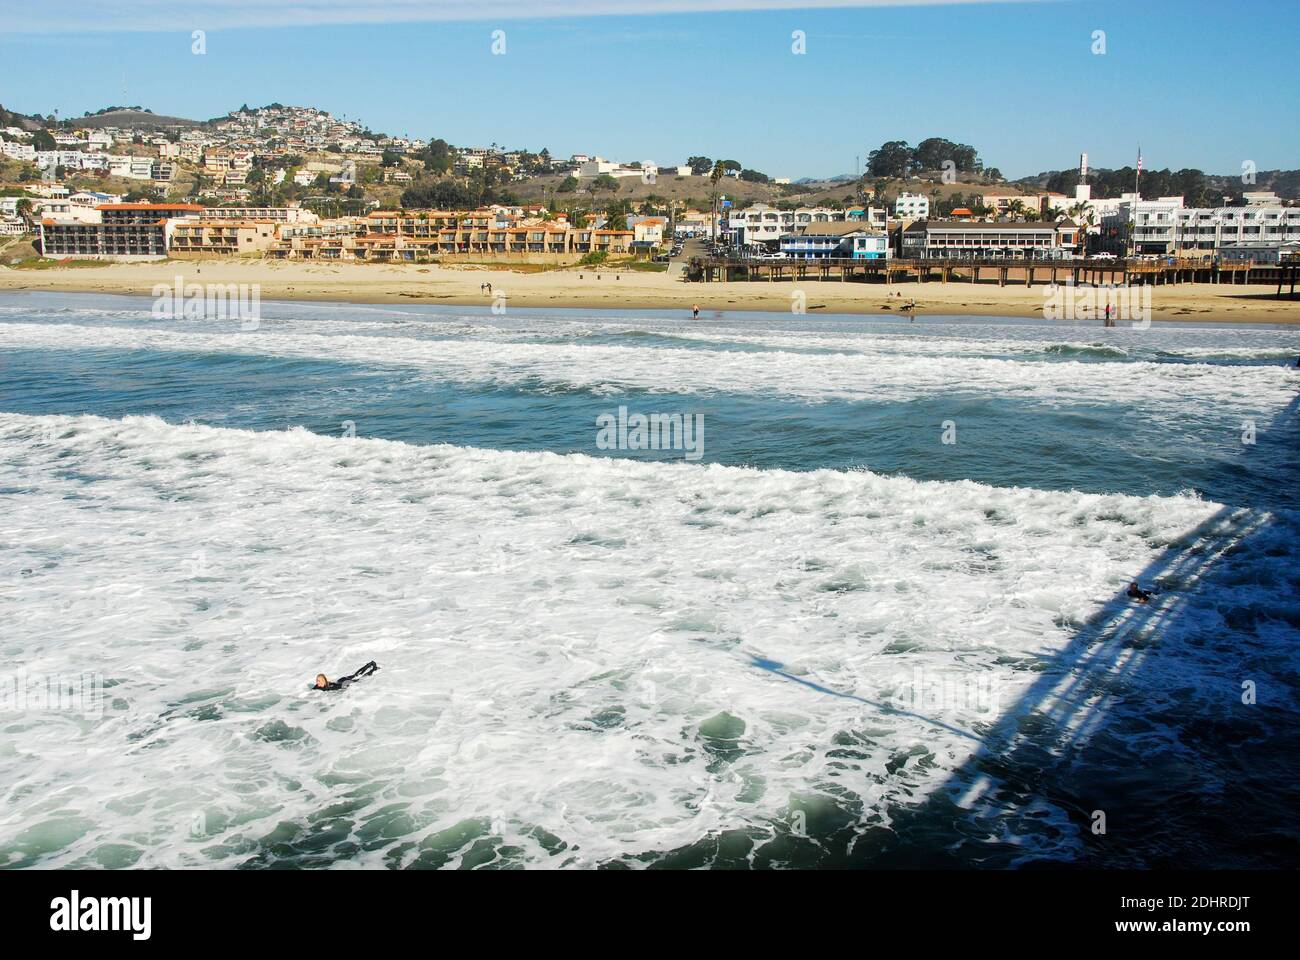 View of the town from the pier of Pismo Beach in San Luis Obispo County, California, famous for its Pismo Clams, beaches, and sand dunes. Stock Photo